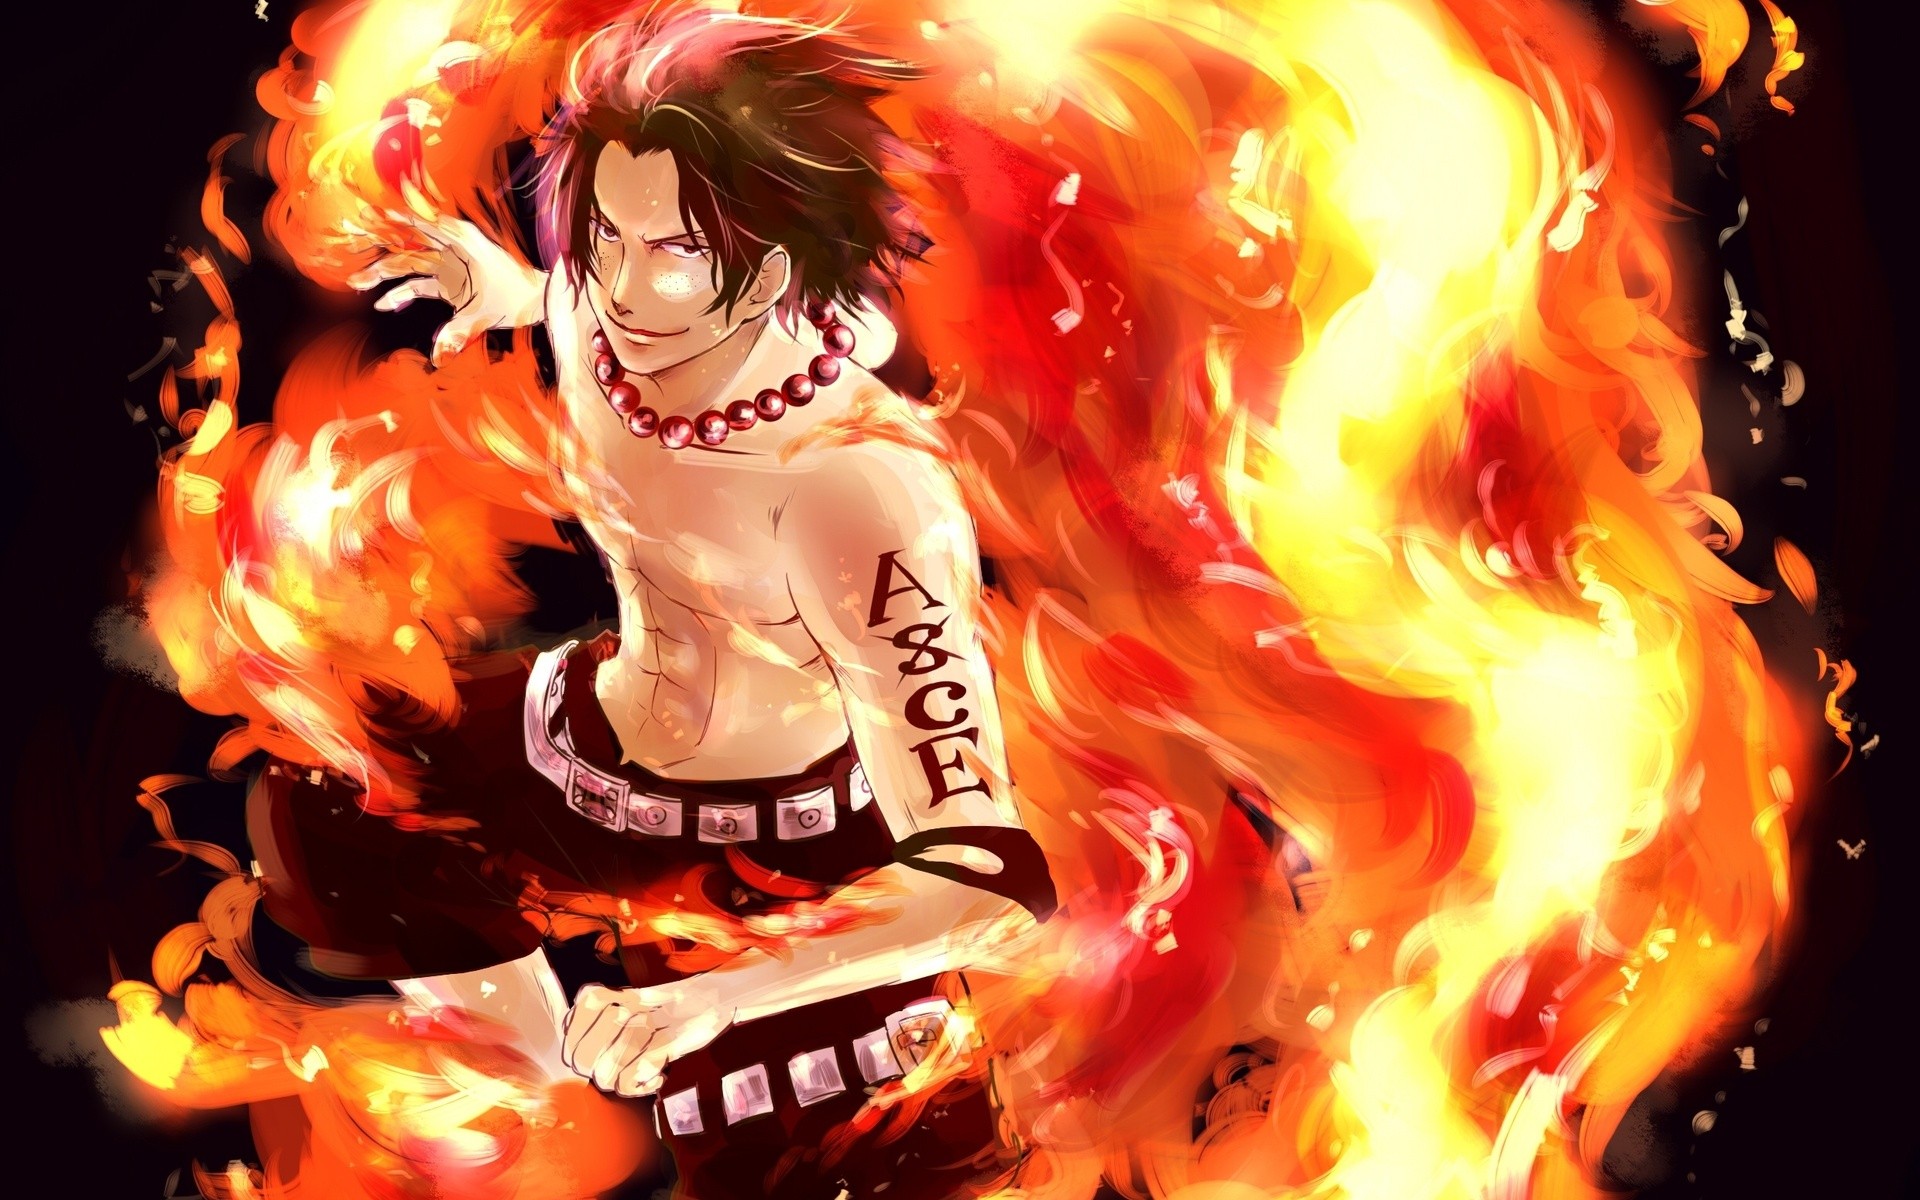 Anime 1920x1200 anime One Piece Portgas D. Ace anime boys abs muscular fire burning inked men